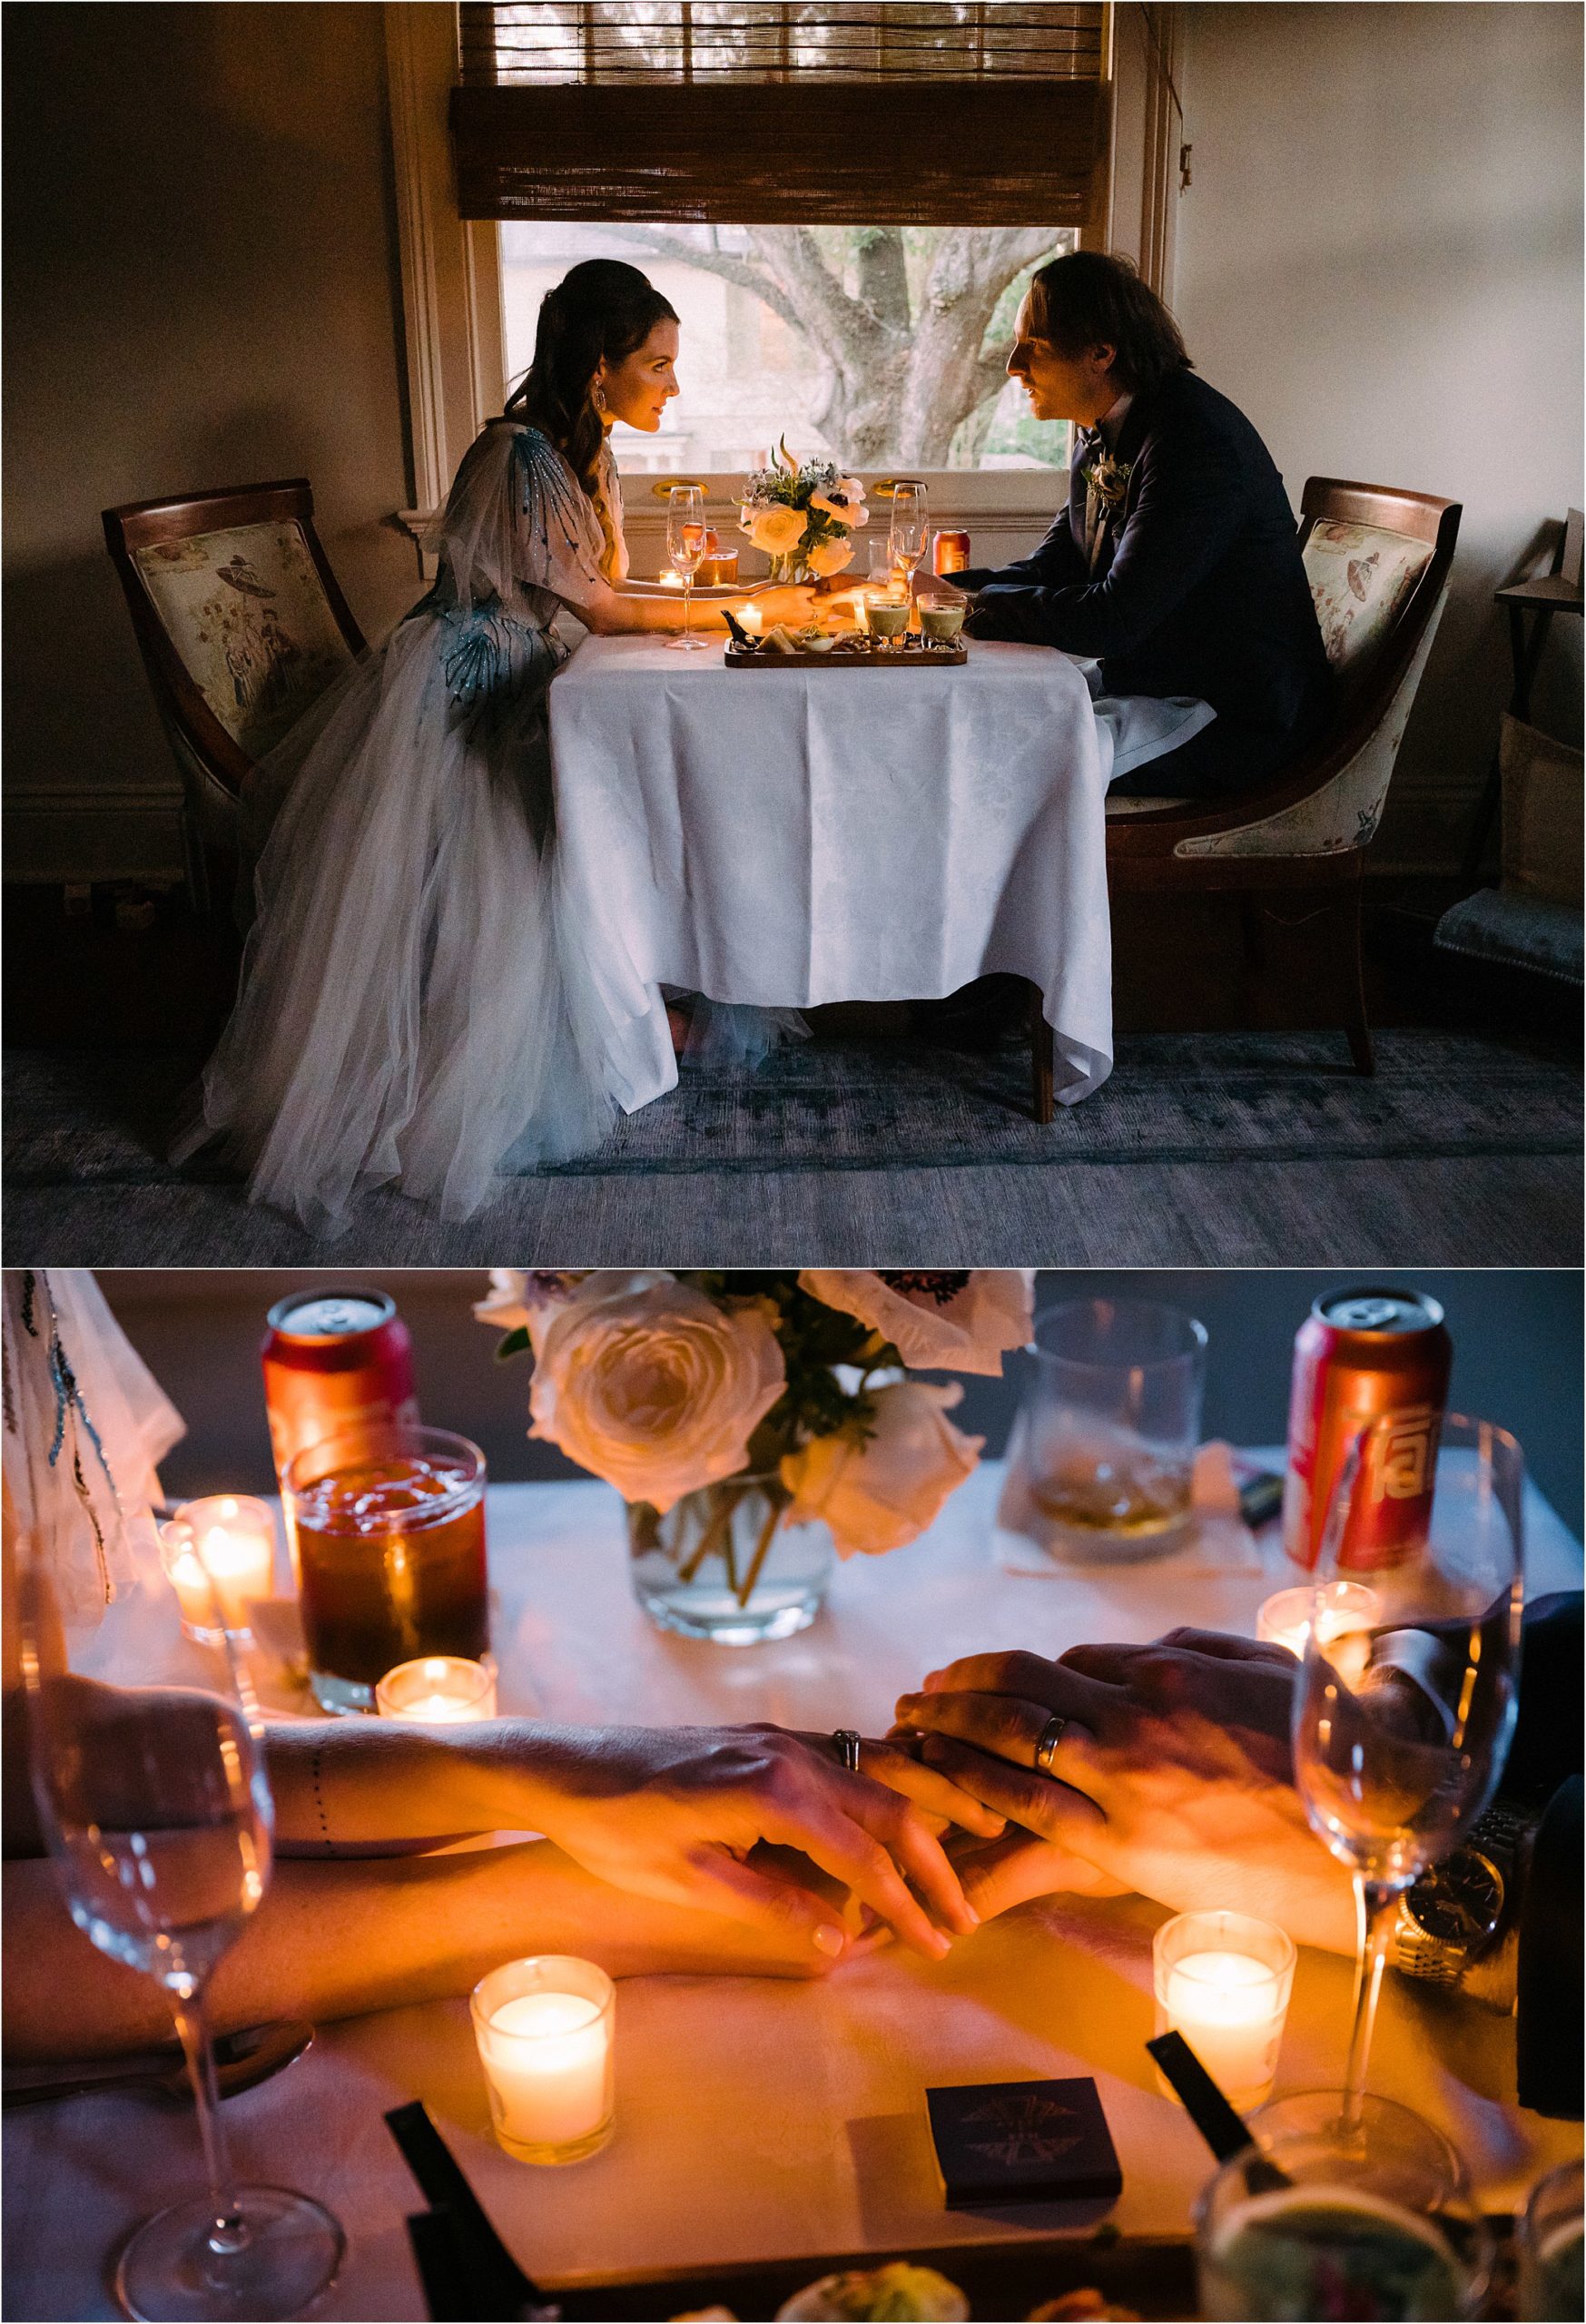 A couple holds hands at a private candlelit reception table beside a window.